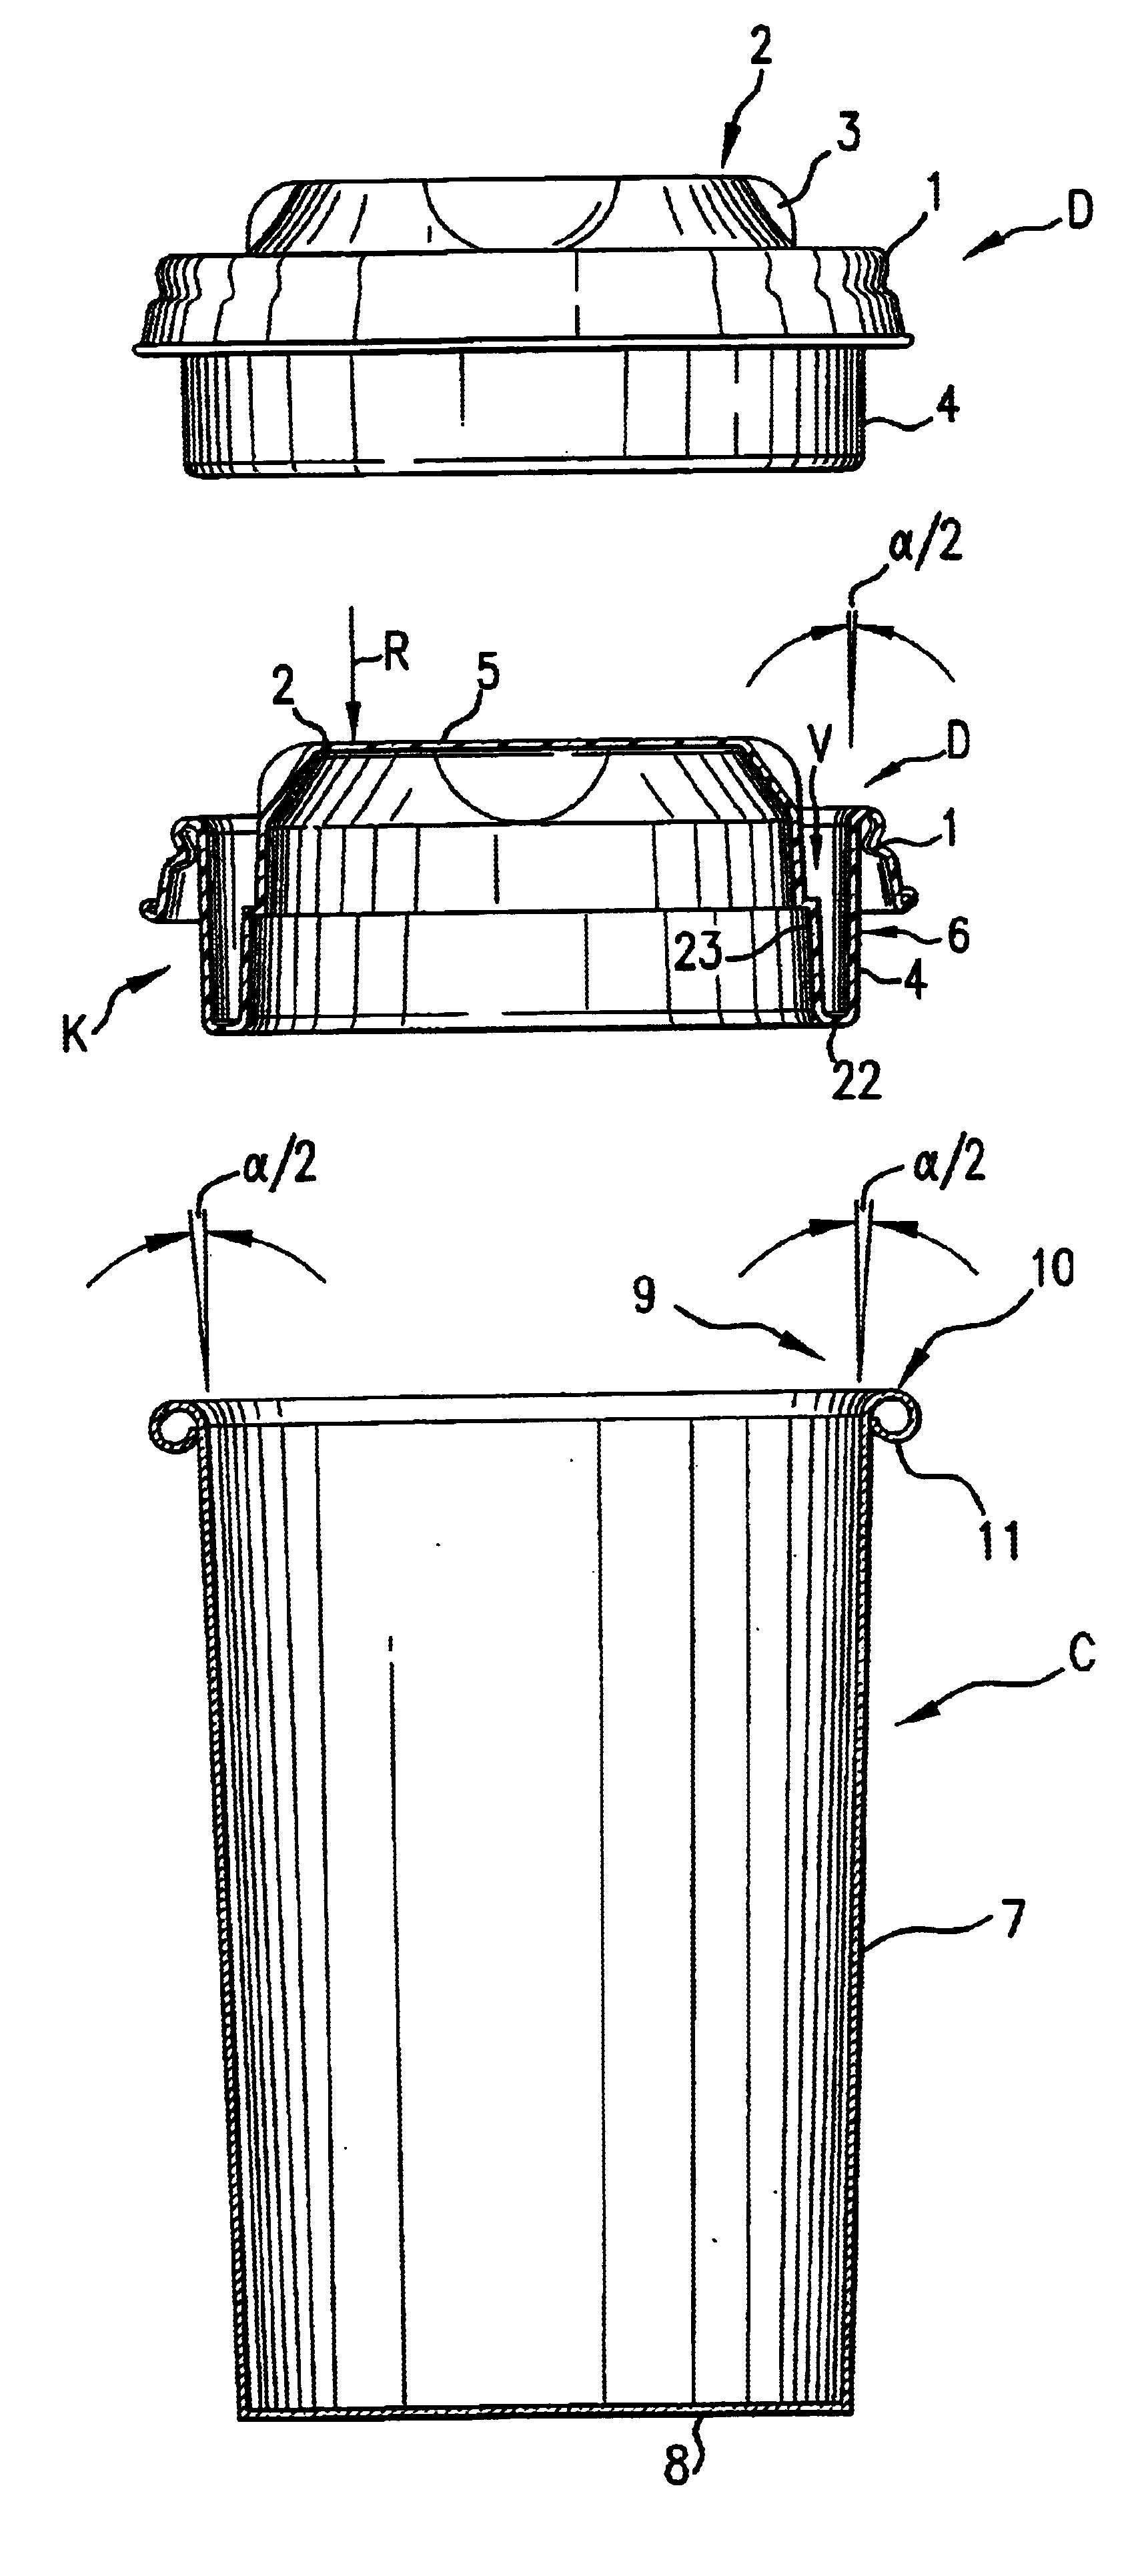 Cup-shaped receptacle and lid